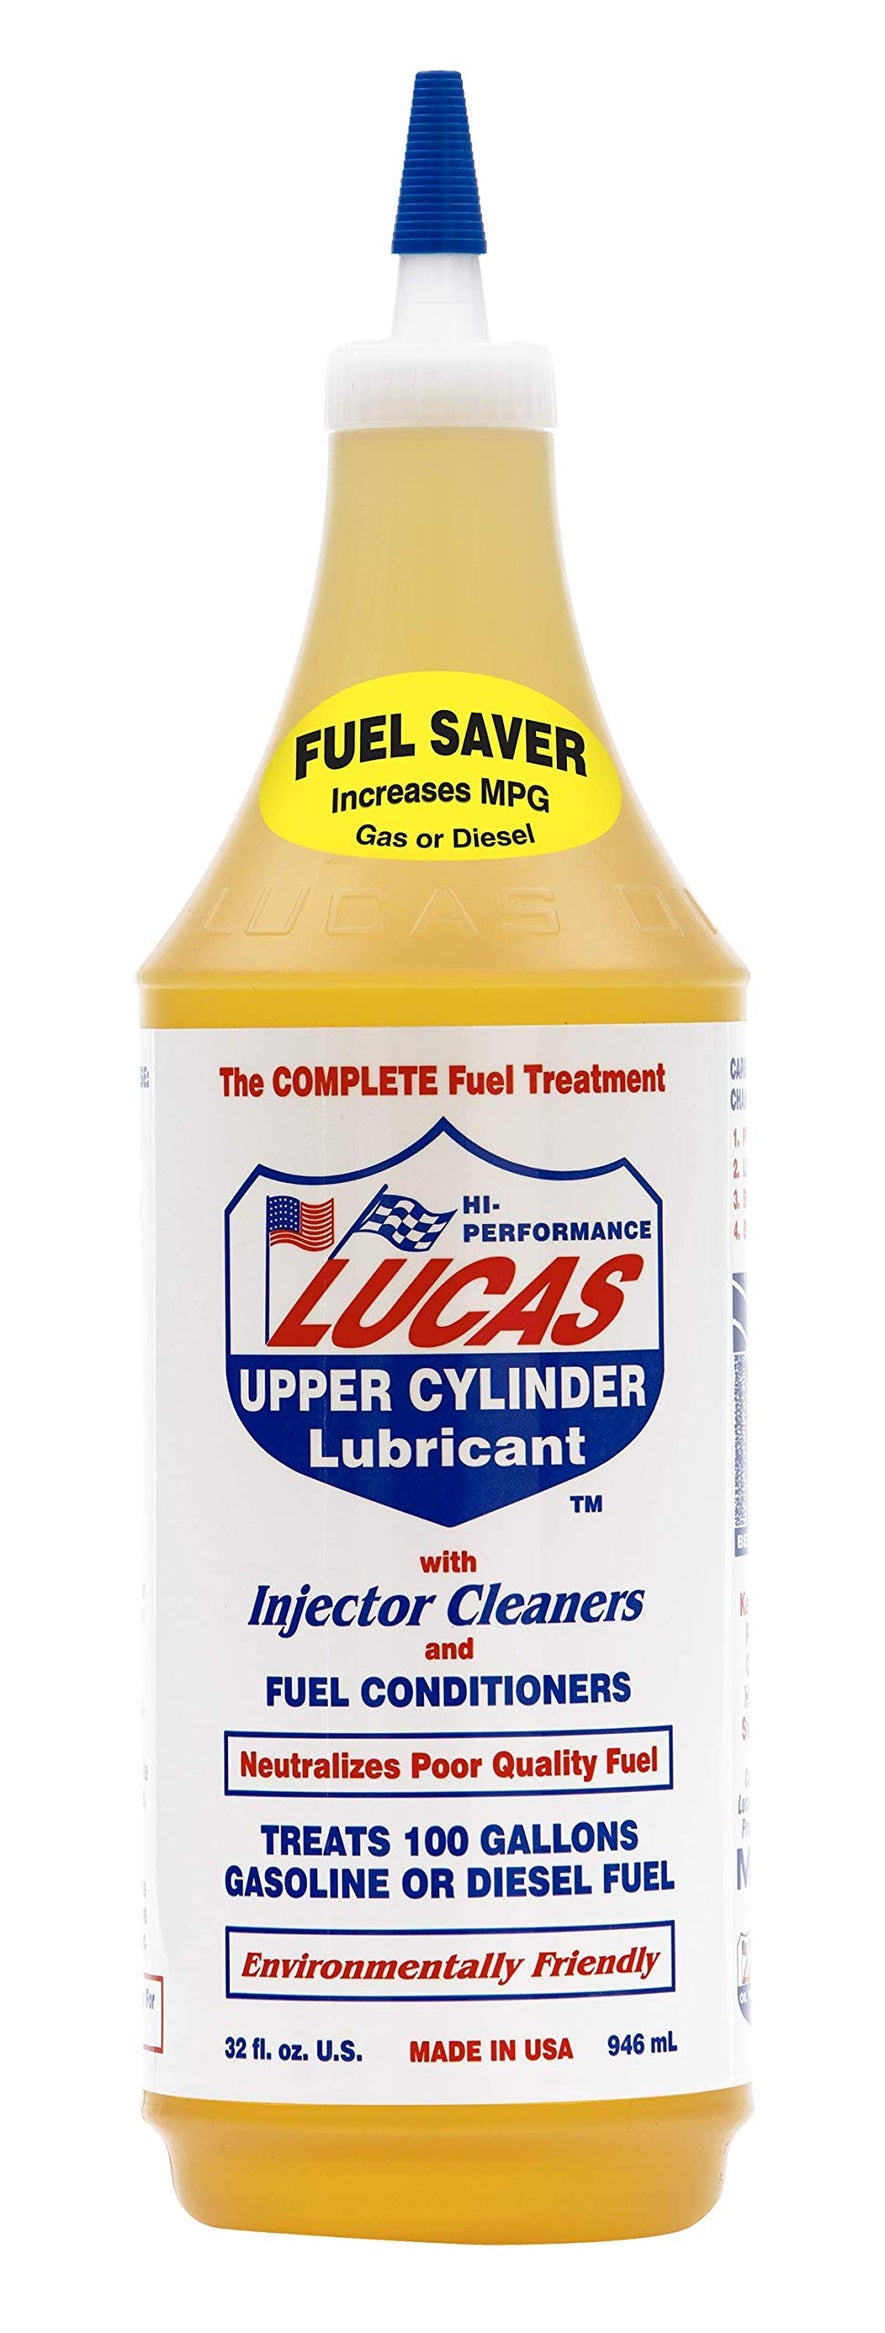 Lucas Upper Cylinder Lubricant & Injector Cleaner Fuel Conditioner 946mL